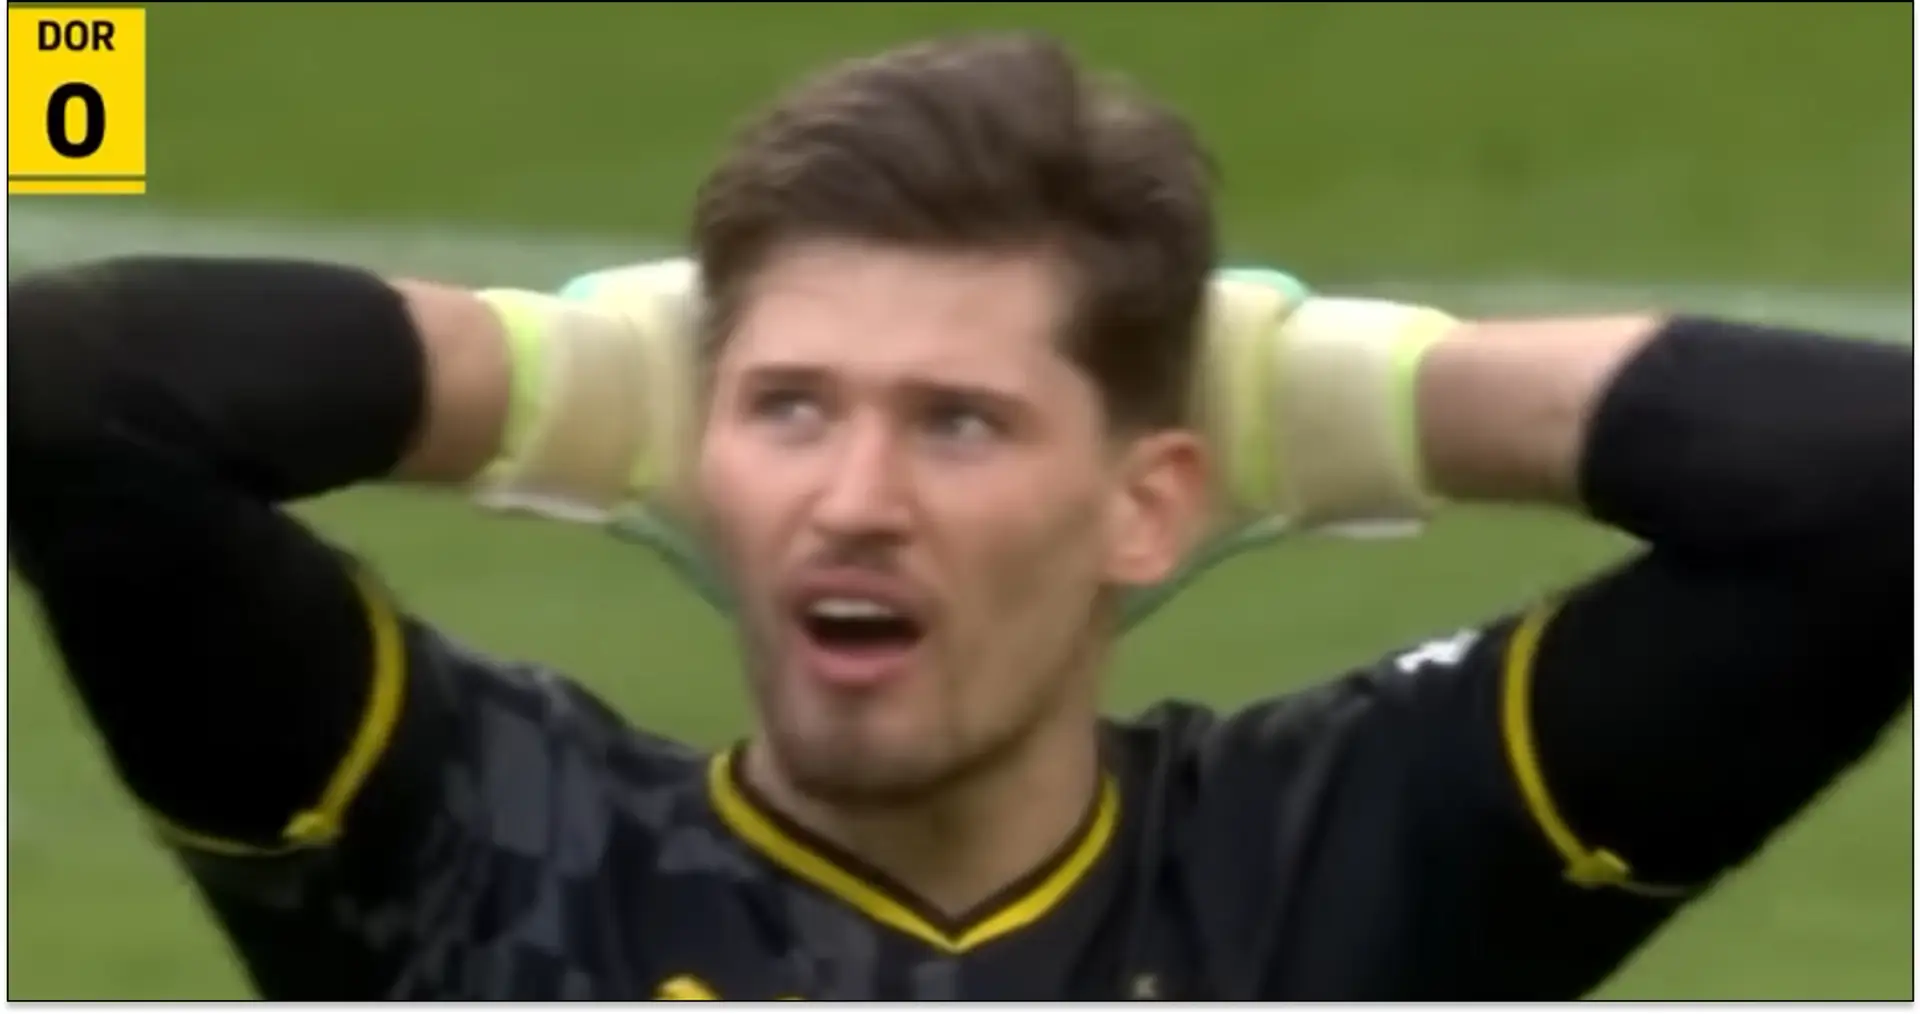 Chelsea linked with Dortmund keeper — he conceded a really stupid goal v Bayern recently